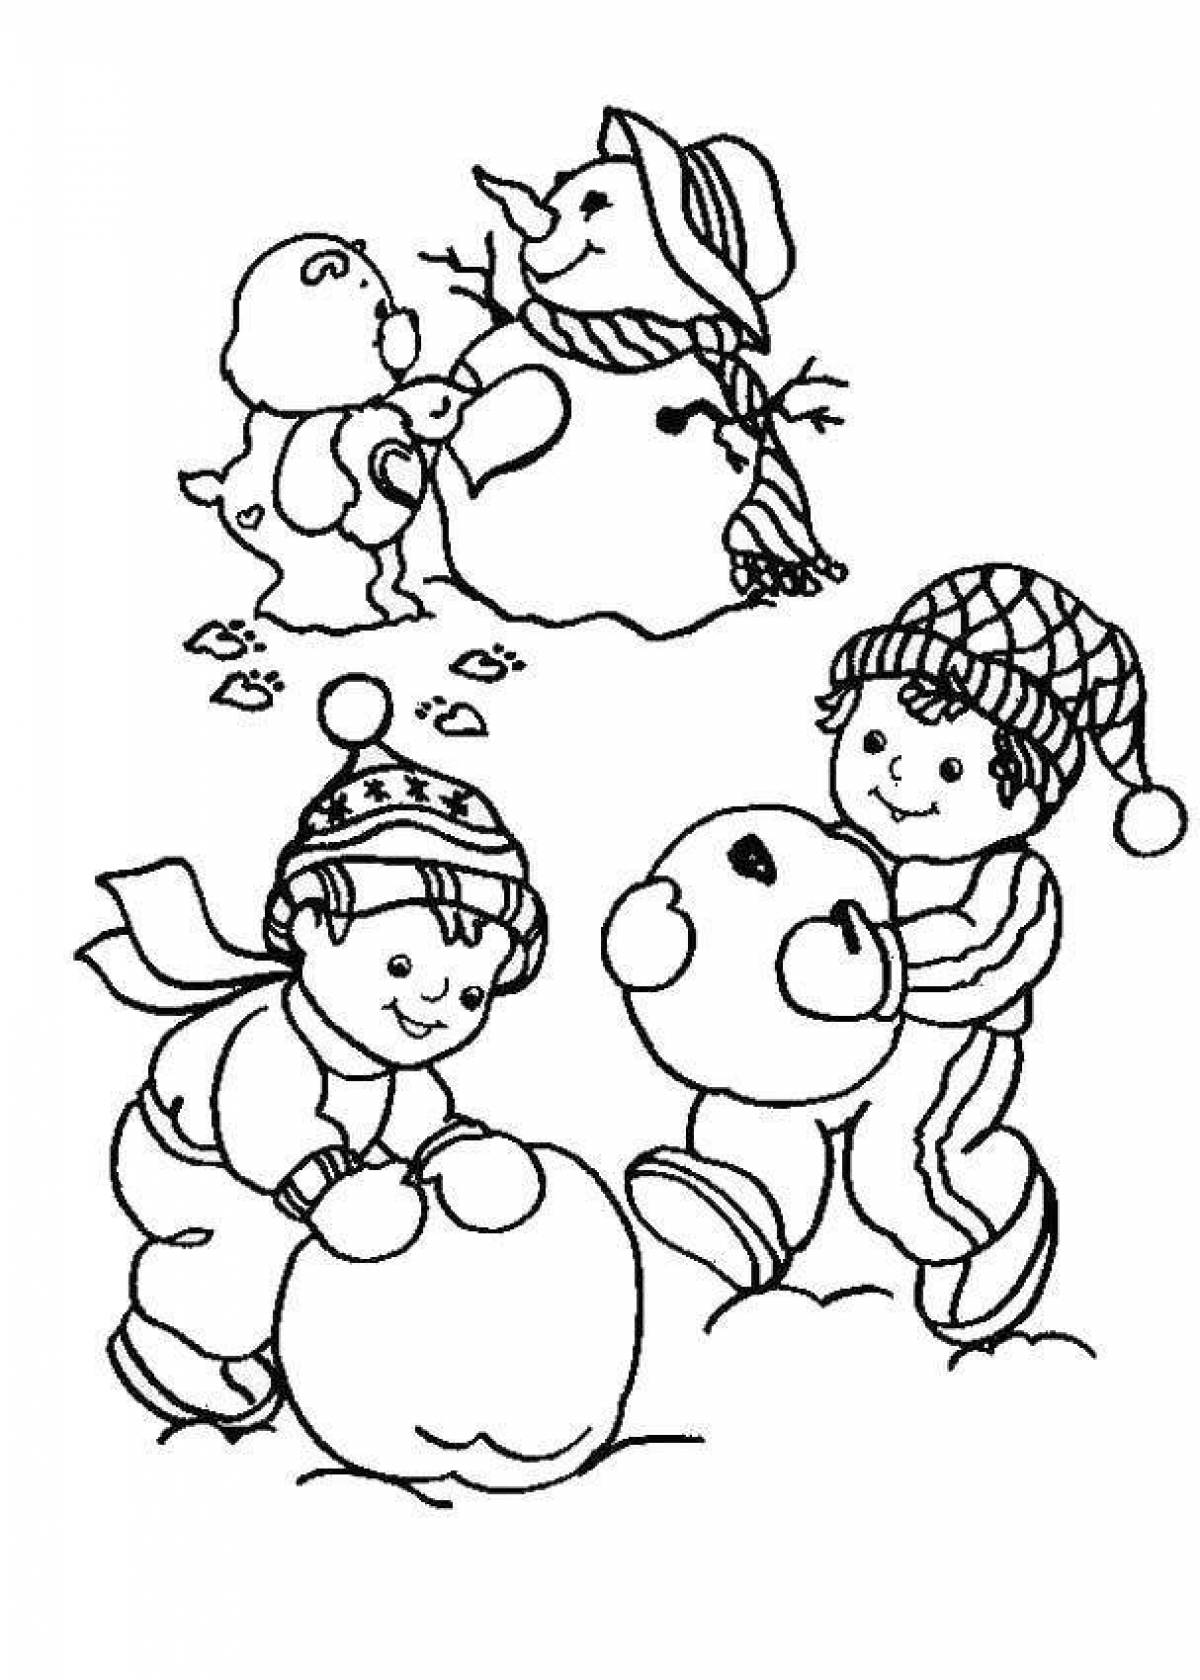 Coloring book kids are excited about the snowball fight